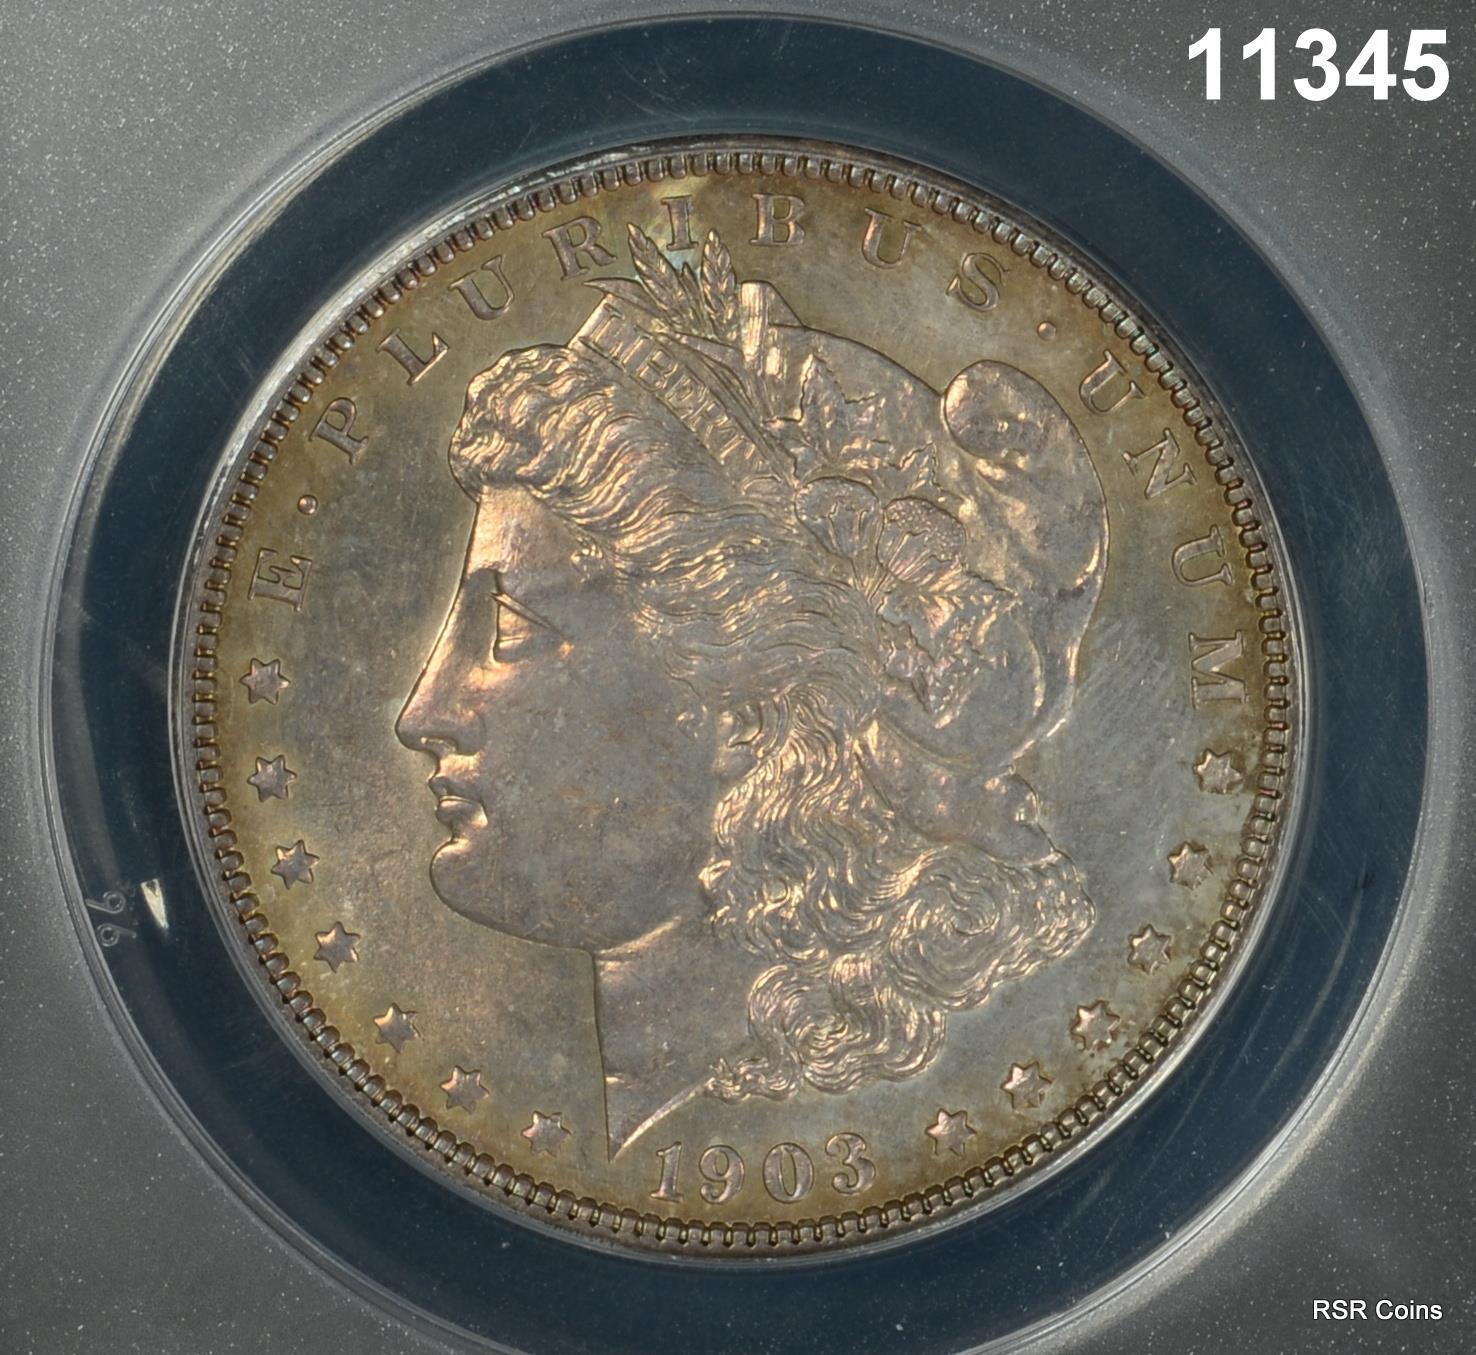 1903 MORGAN SILVER DOLLAR ANACS CERTIFIED MS63 GOLDEN COLOR LOOKS P-L! #11345